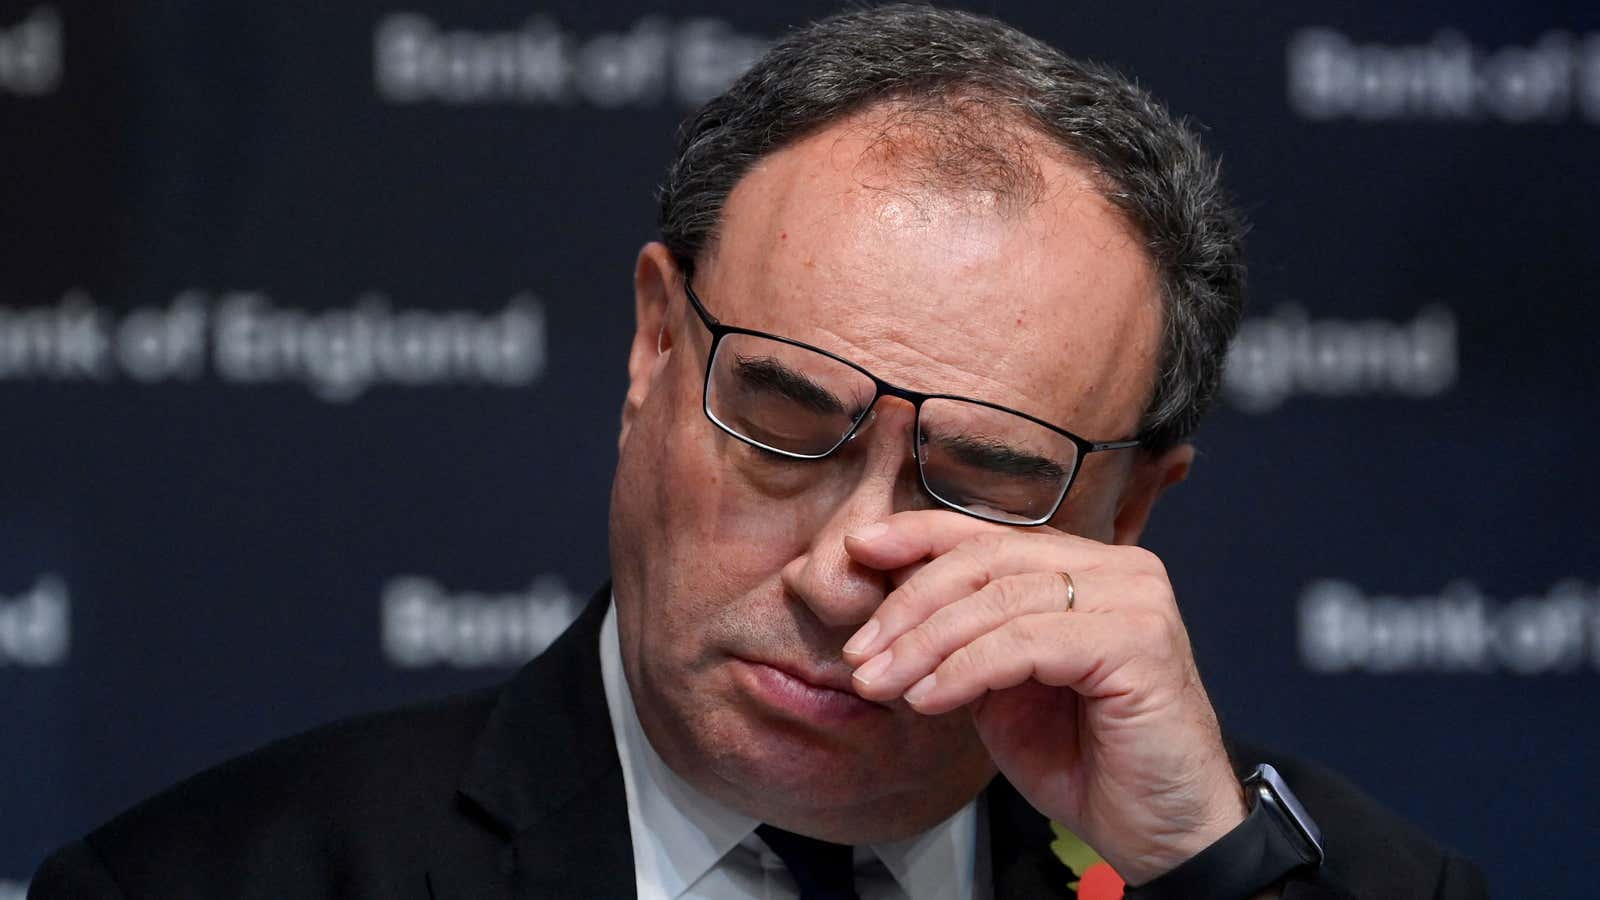 Governor of the Bank of England Andrew Bailey gestures as he addresses the media on the Monetary Policy Report at the Bank of England, in London, on November 3, 2022.